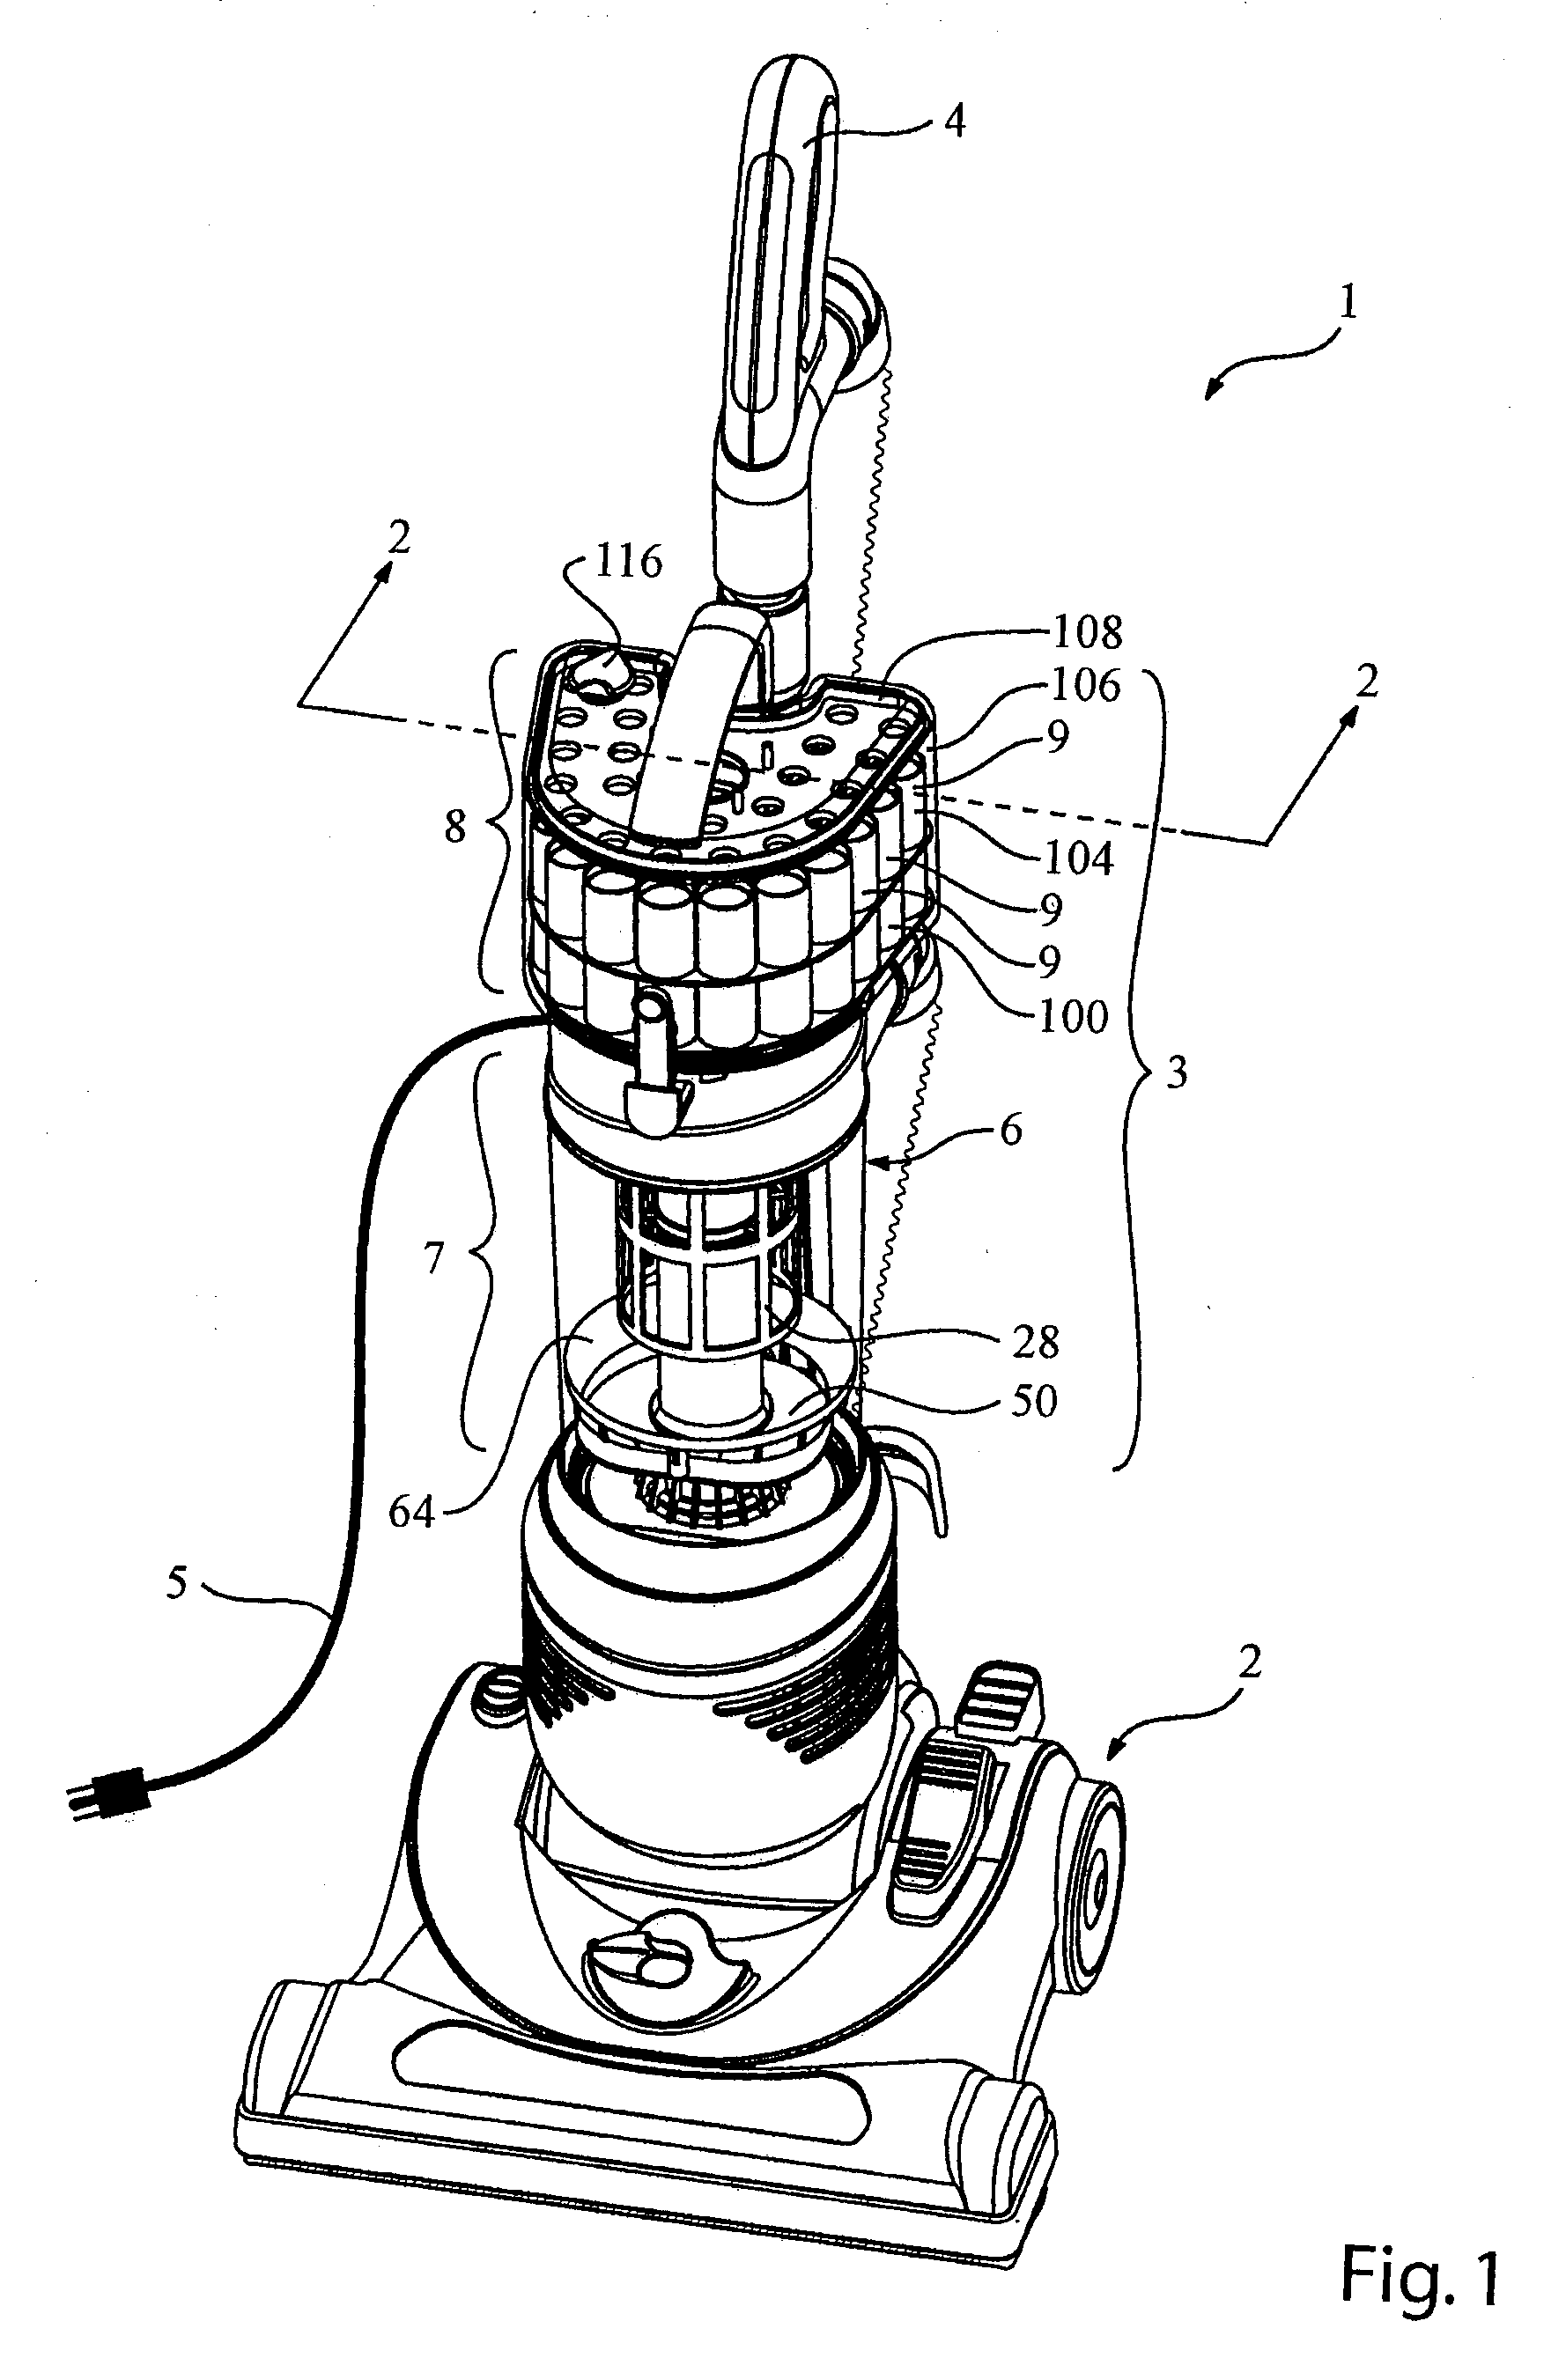 Vacuum cleaner with a divider